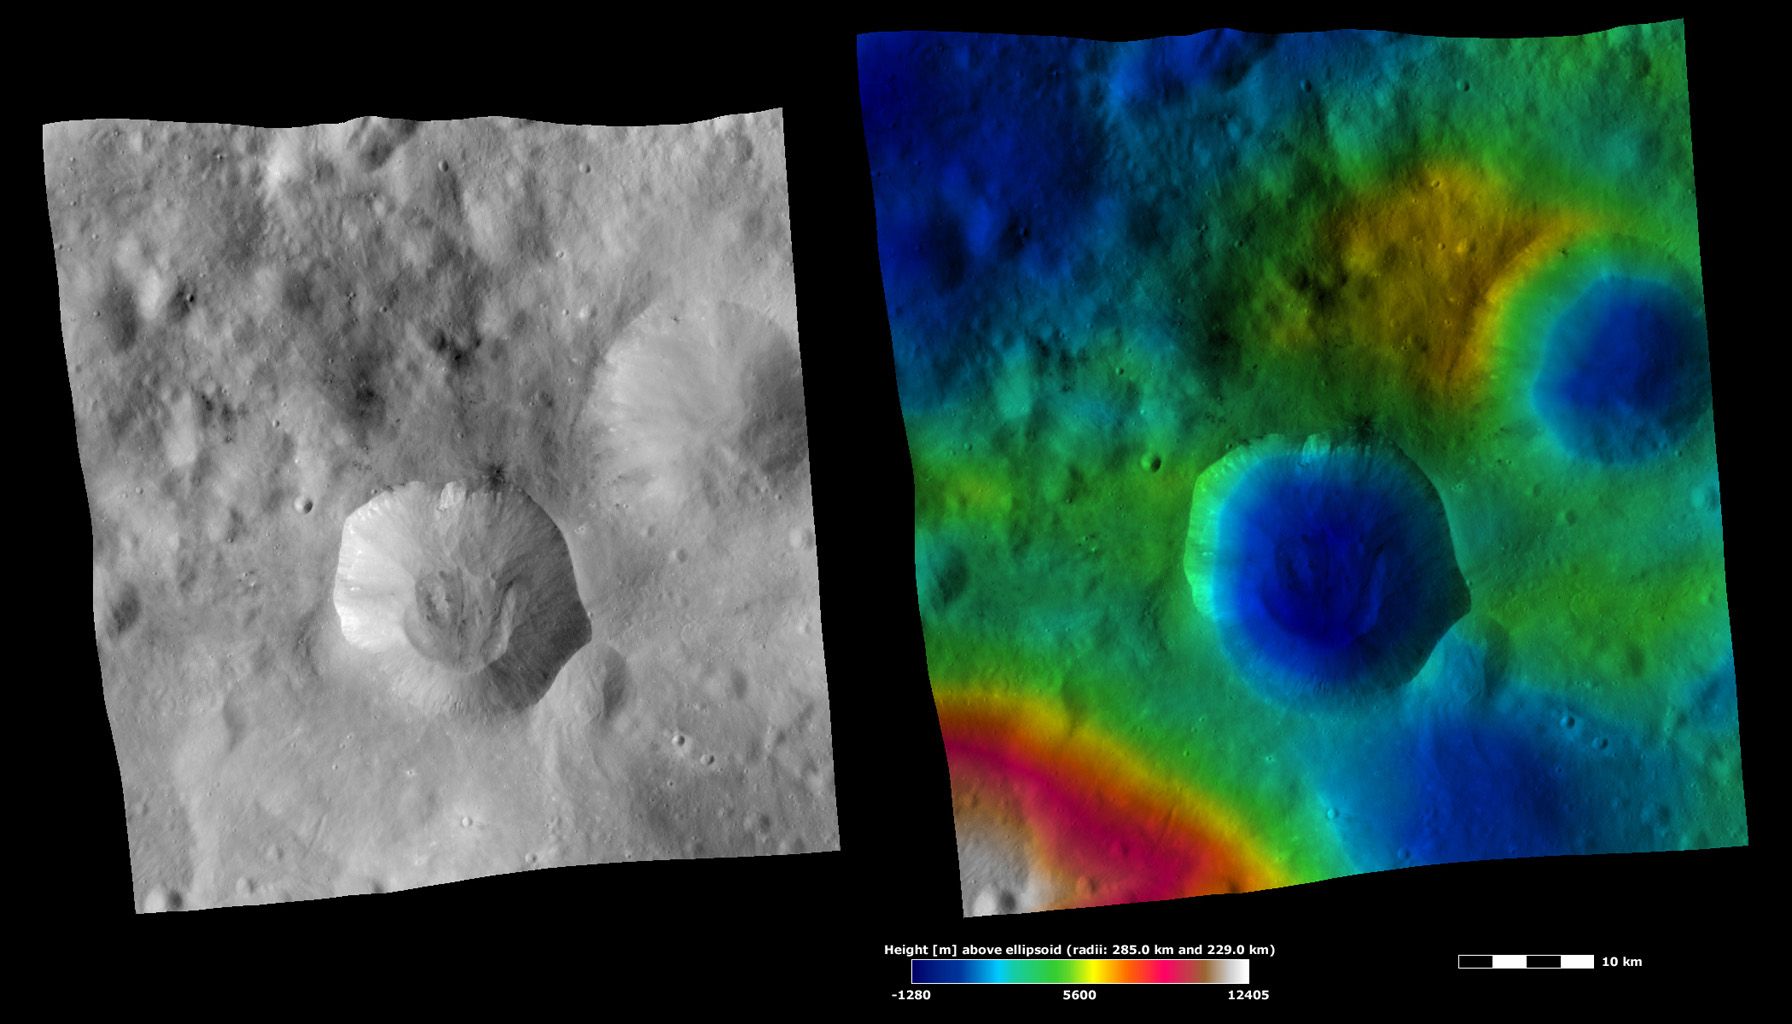 Apparent Brightness and Topography Images of Drusilla Crater